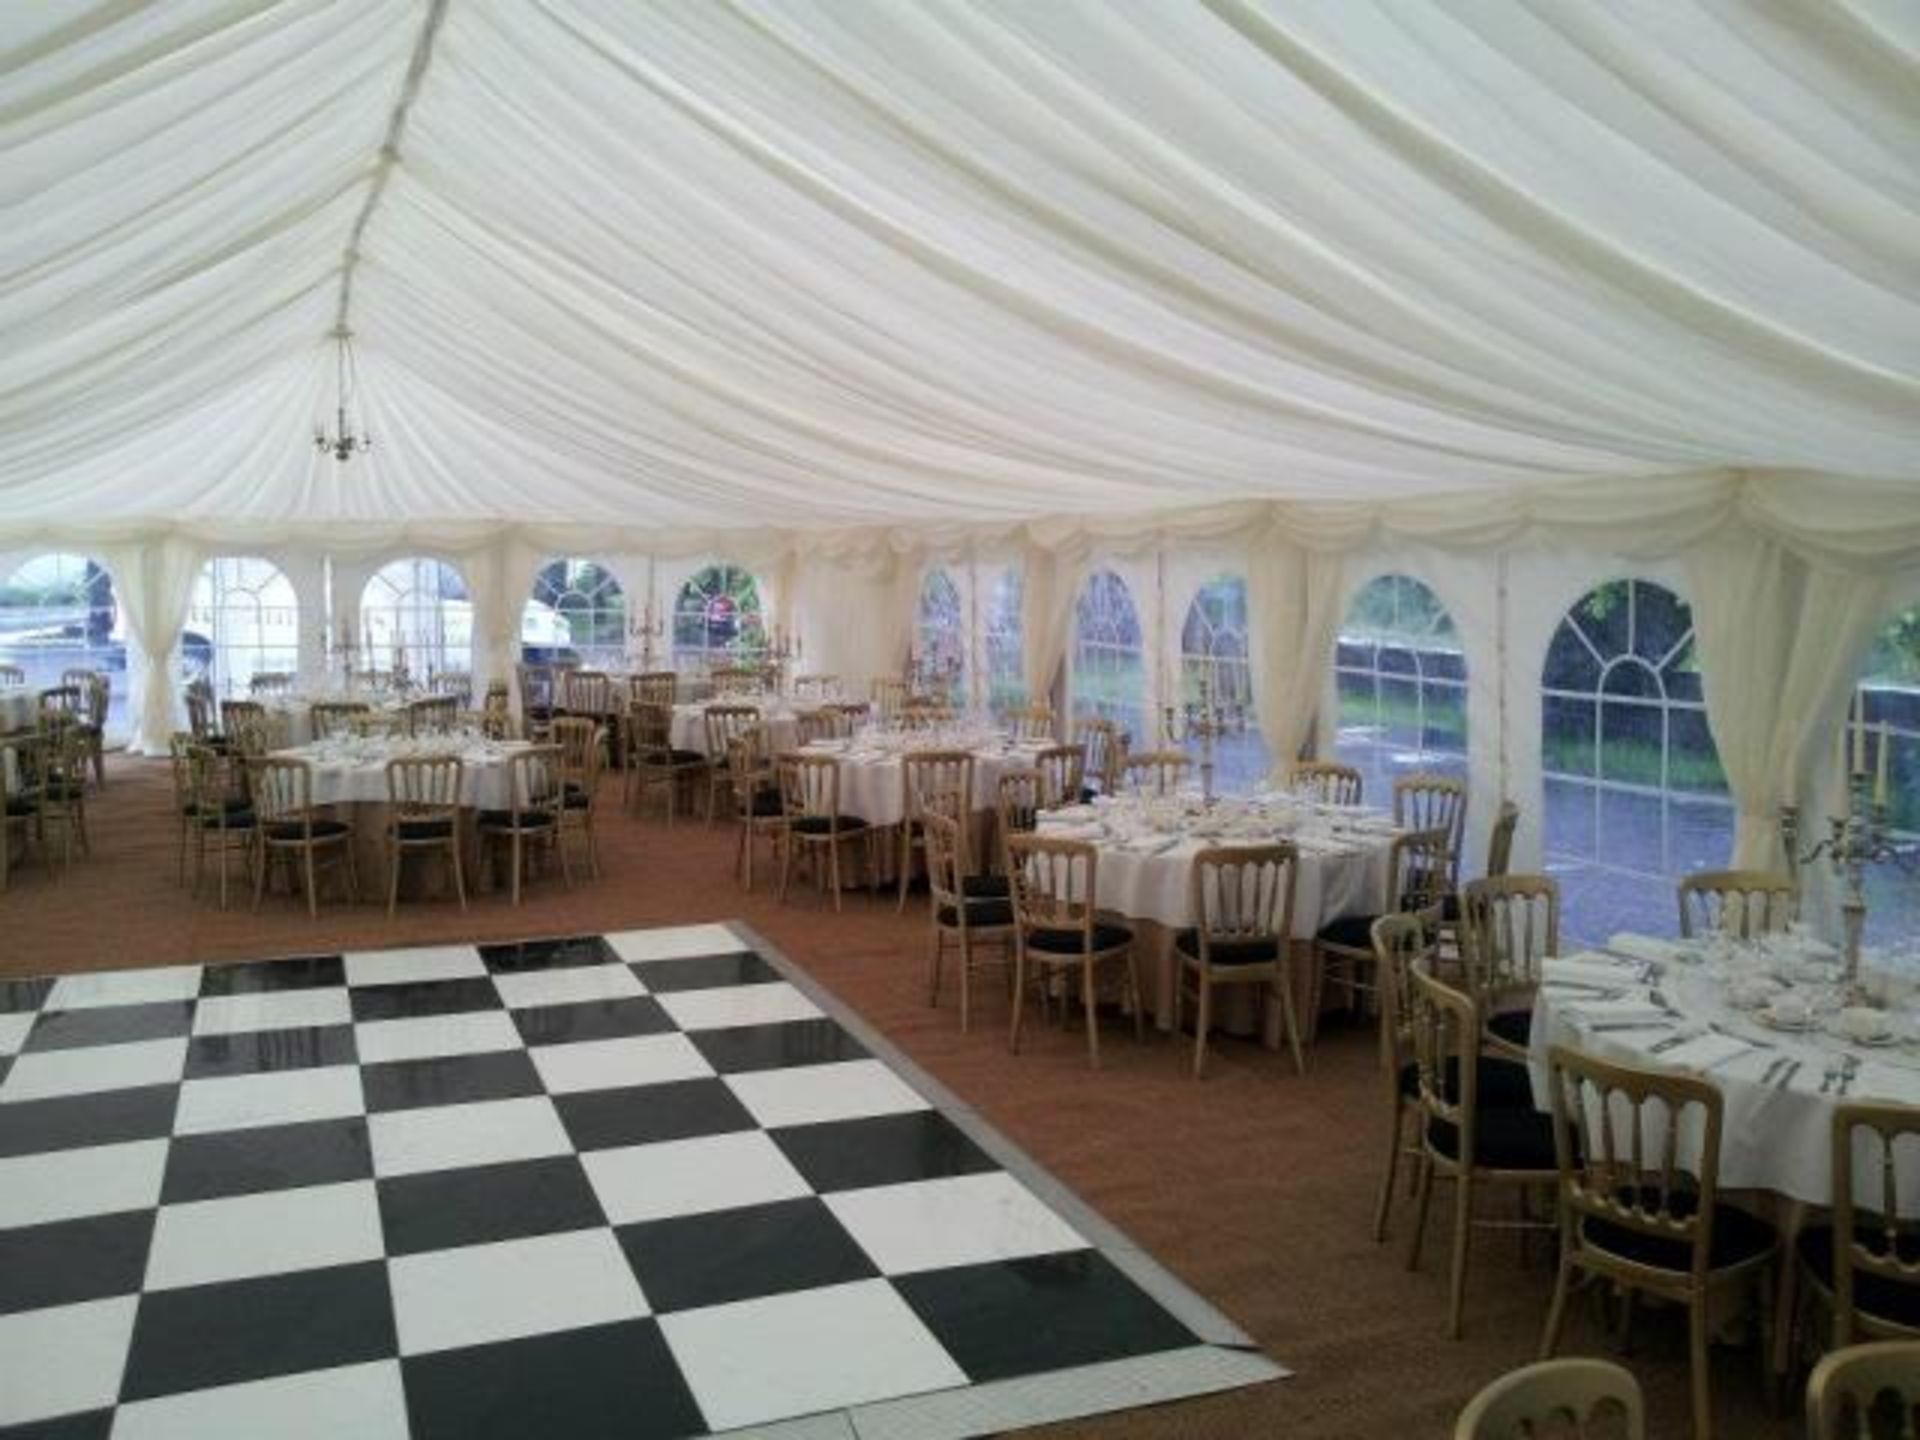 Grumpy Joe’s Acrylic 16ft x 16ft Black and White Chequered Dance Floor with Carry Trolley - Image 2 of 3